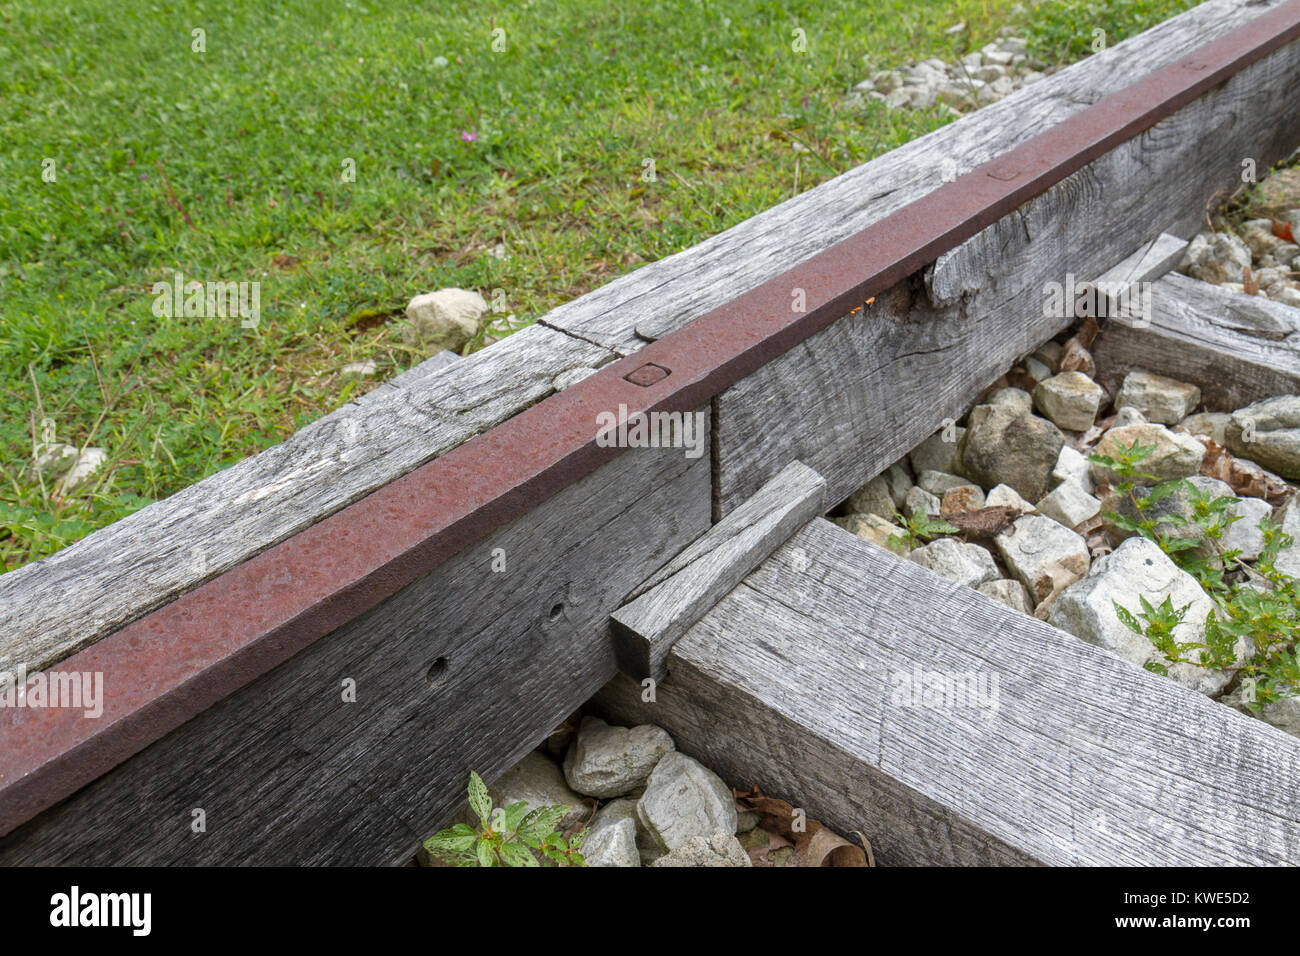 Railway track detail, part of the Allegheny Portage Railroad National Historic Site, Blair county, Pennsylvania, United States. Stock Photo